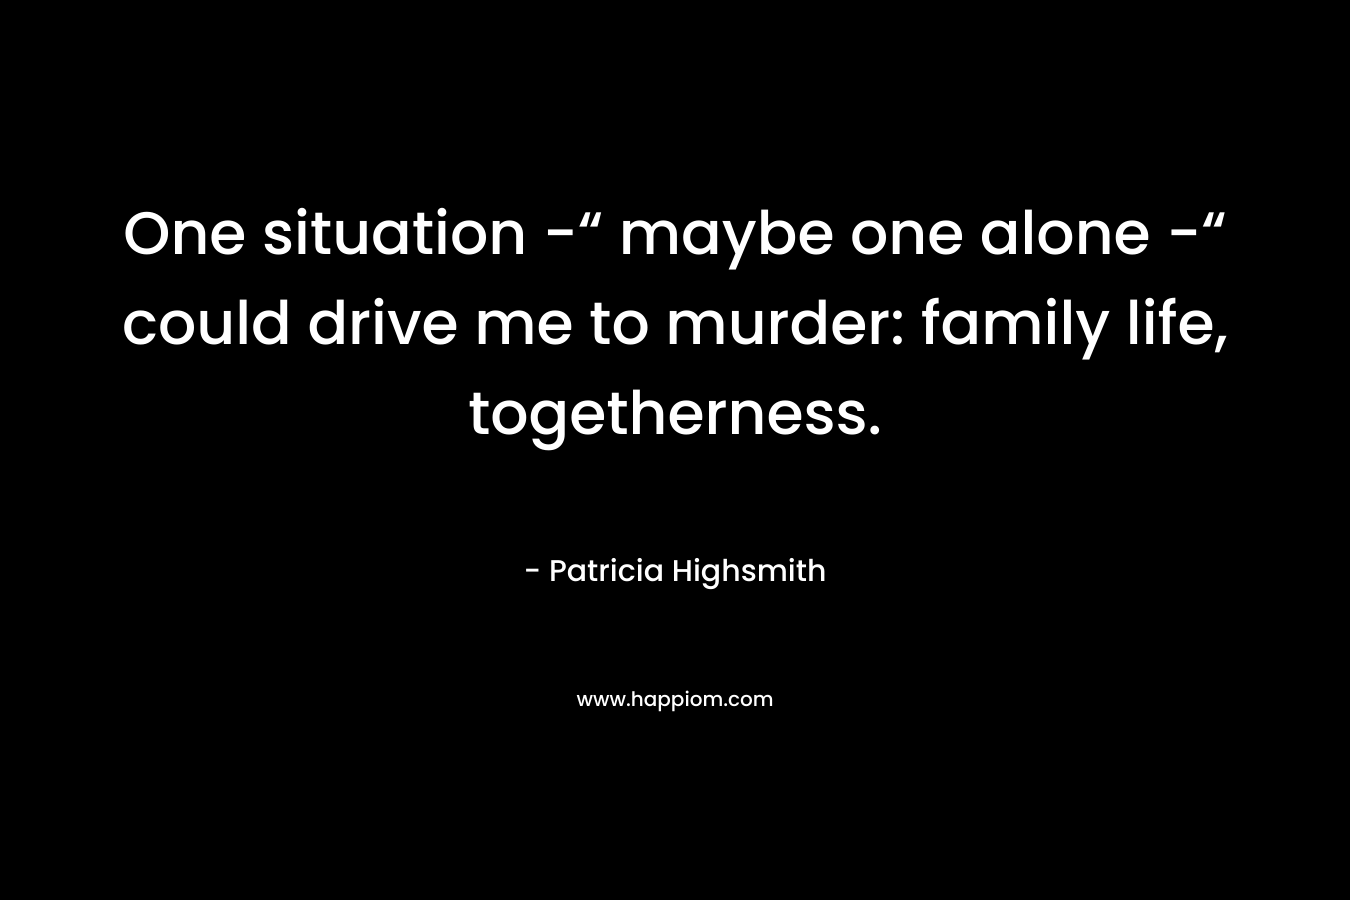 One situation -“ maybe one alone -“ could drive me to murder: family life, togetherness.